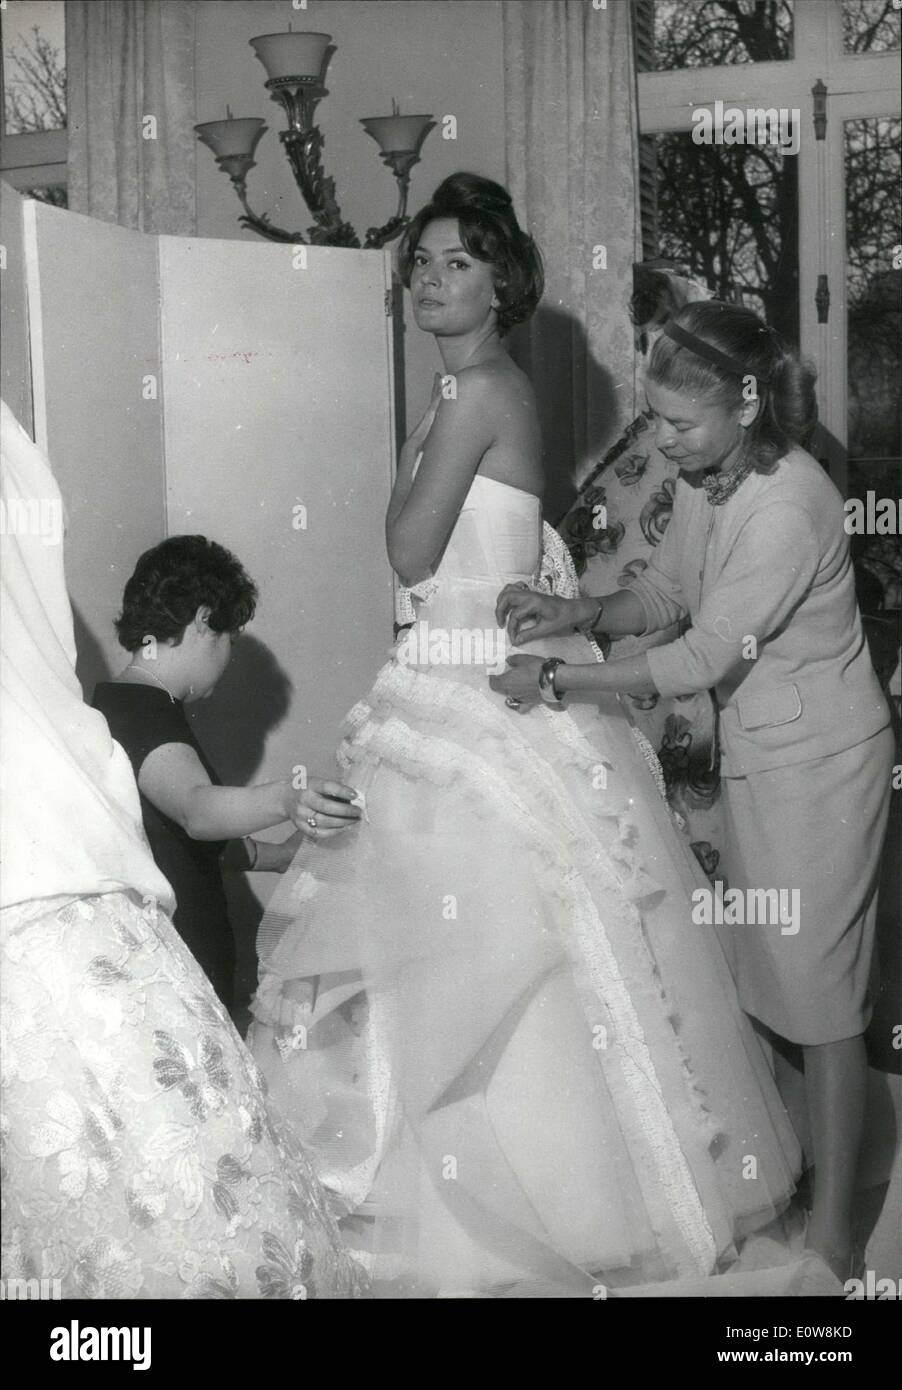 Jan. 17, 1962 - Carven & Assistant Alter Spring Collection Wedding Gown Stock Photo